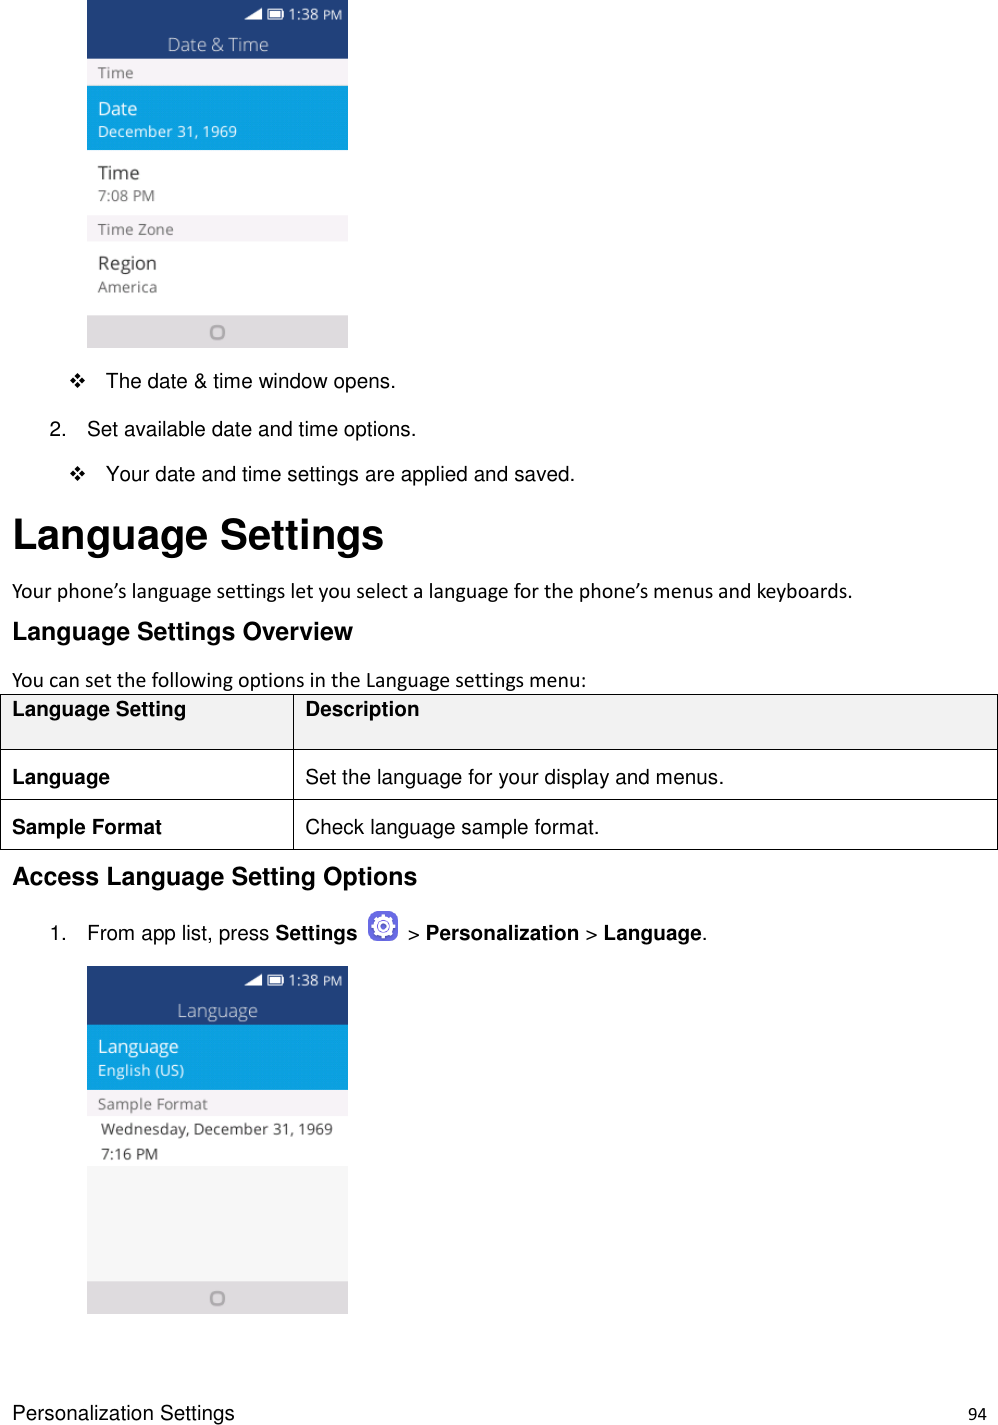 Personalization Settings    94       The date &amp; time window opens. 2.  Set available date and time options.   Your date and time settings are applied and saved. Language Settings Your phone’s language settings let you select a language for the phone’s menus and keyboards. Language Settings Overview You can set the following options in the Language settings menu:   Language Setting Description Language Set the language for your display and menus. Sample Format Check language sample format. Access Language Setting Options 1.  From app list, press Settings    &gt; Personalization &gt; Language.       